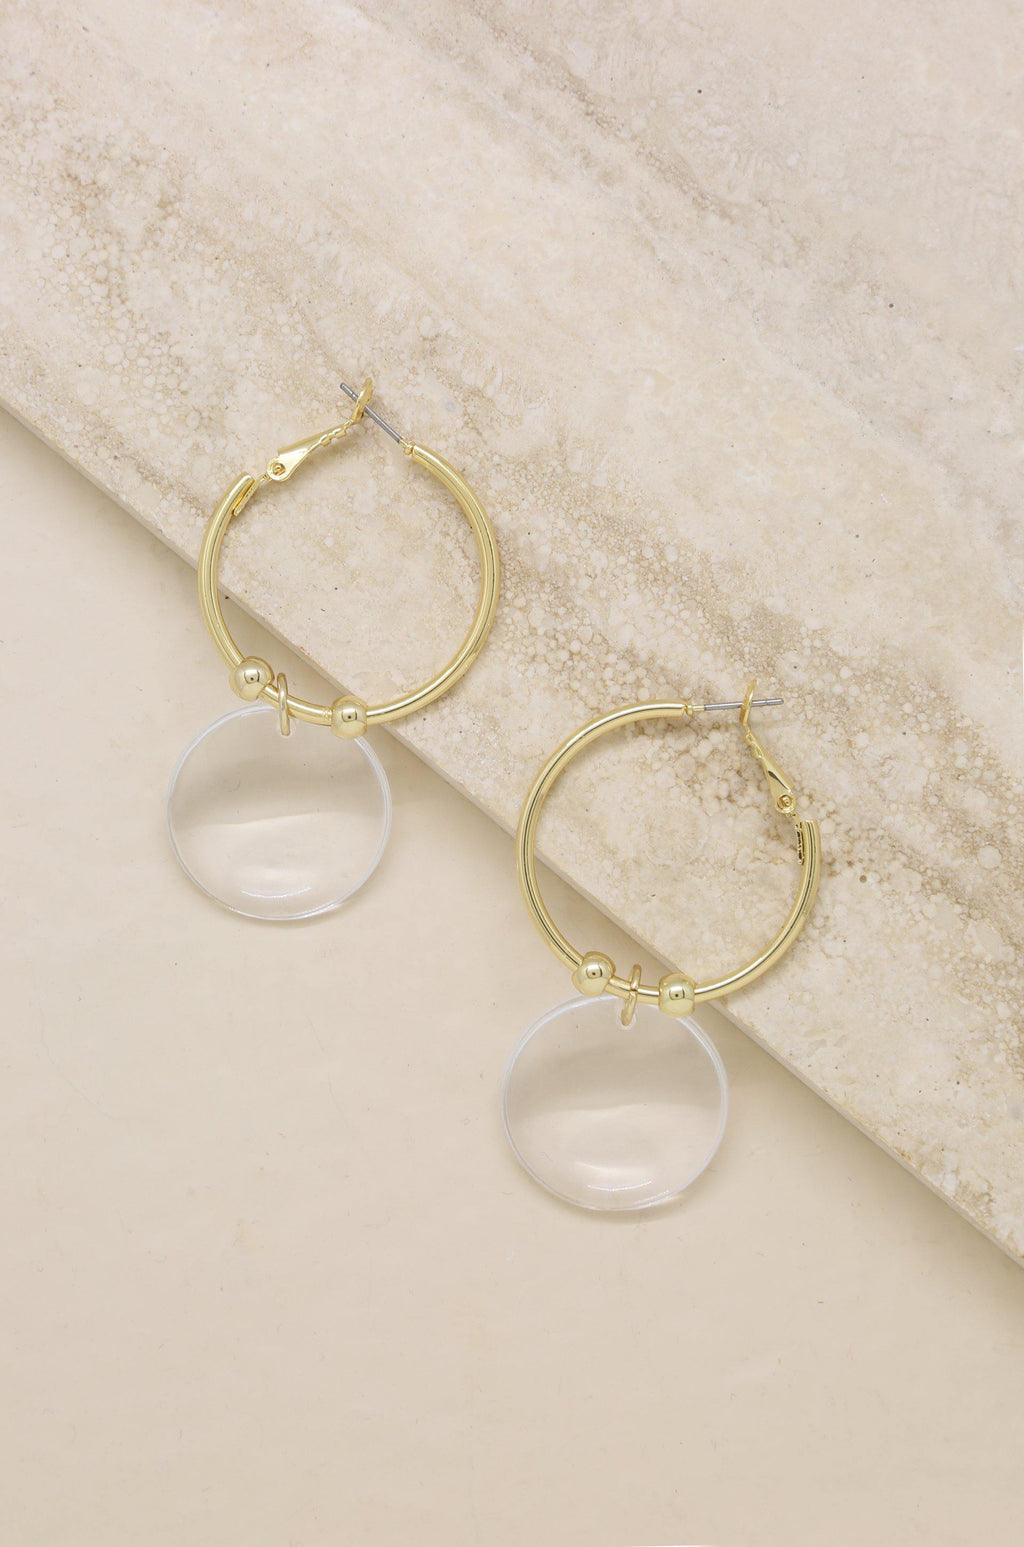 Clear Resin Circle Hoop 18k Gold Plated Earrings - The Gallant Way